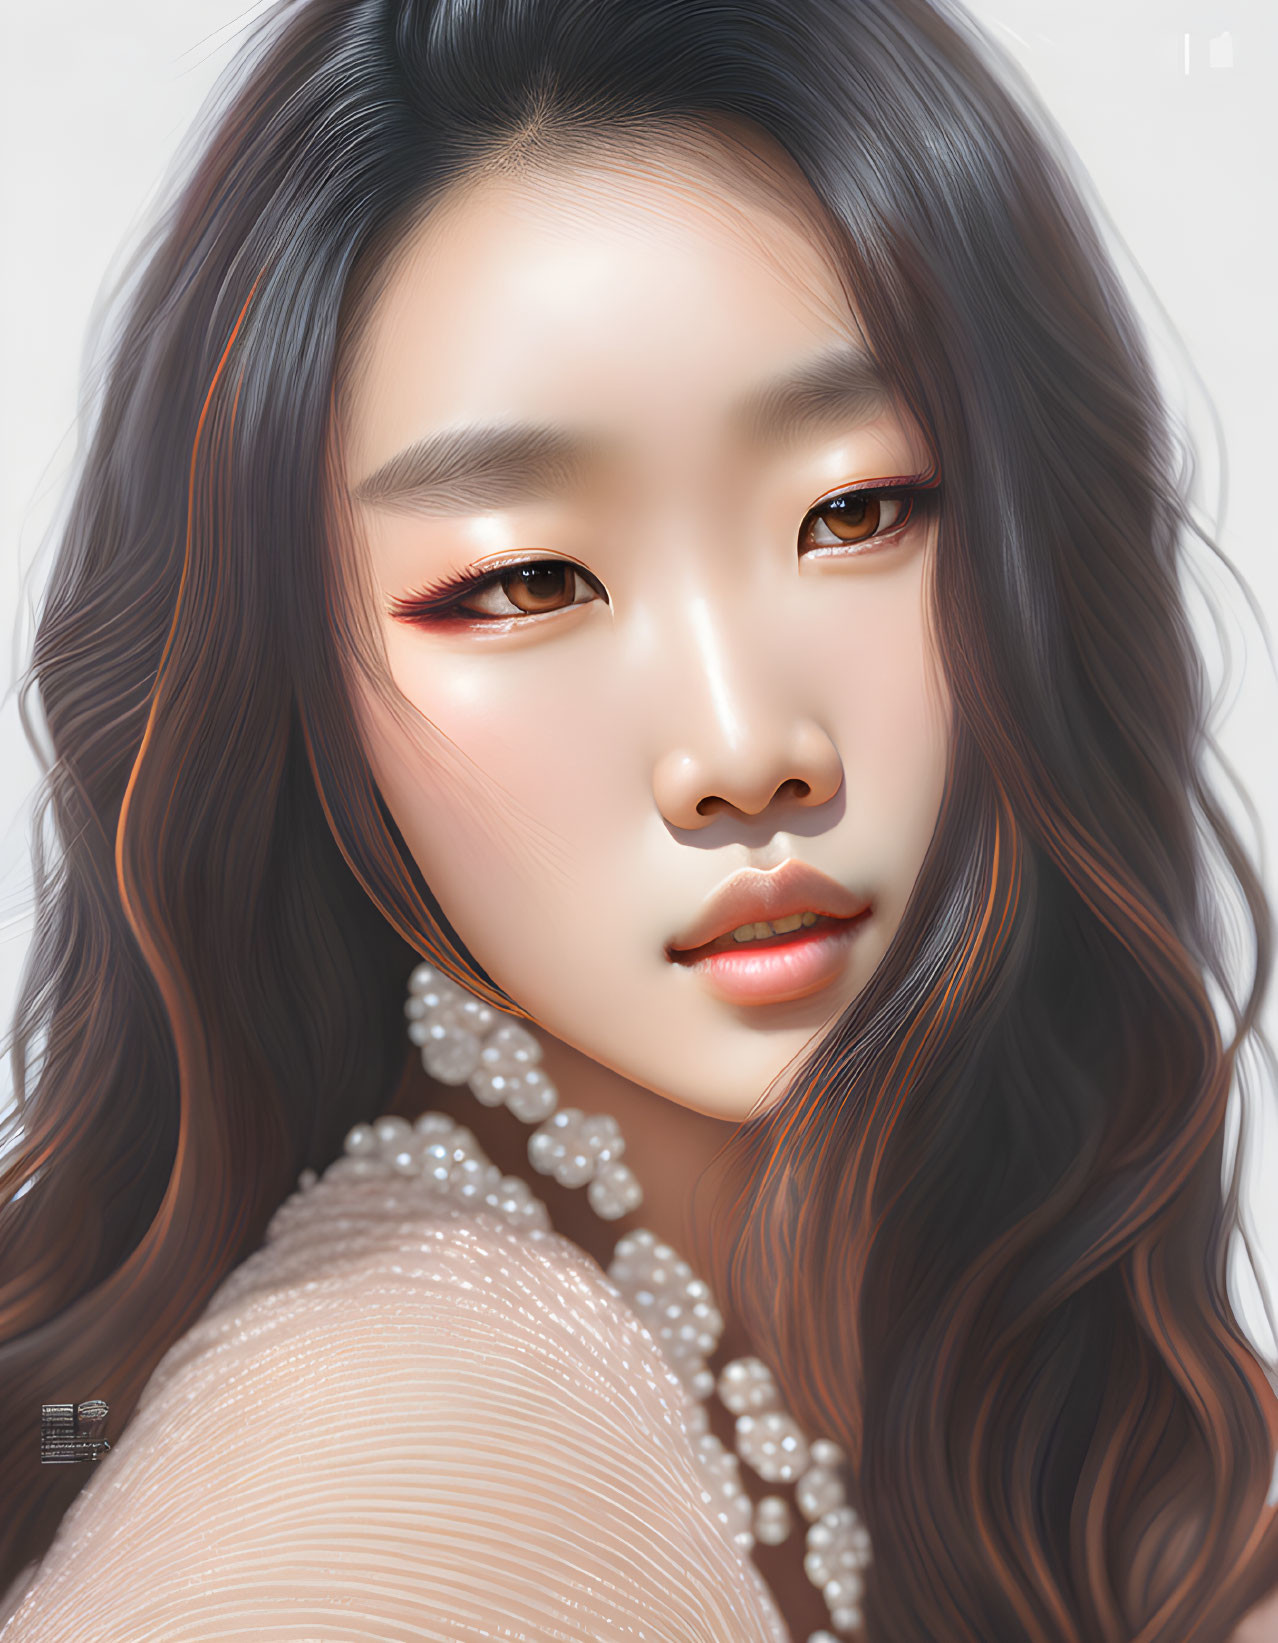 Digital portrait of woman with wavy hair, pearlescent eye shadow, glossy lips, and pearl